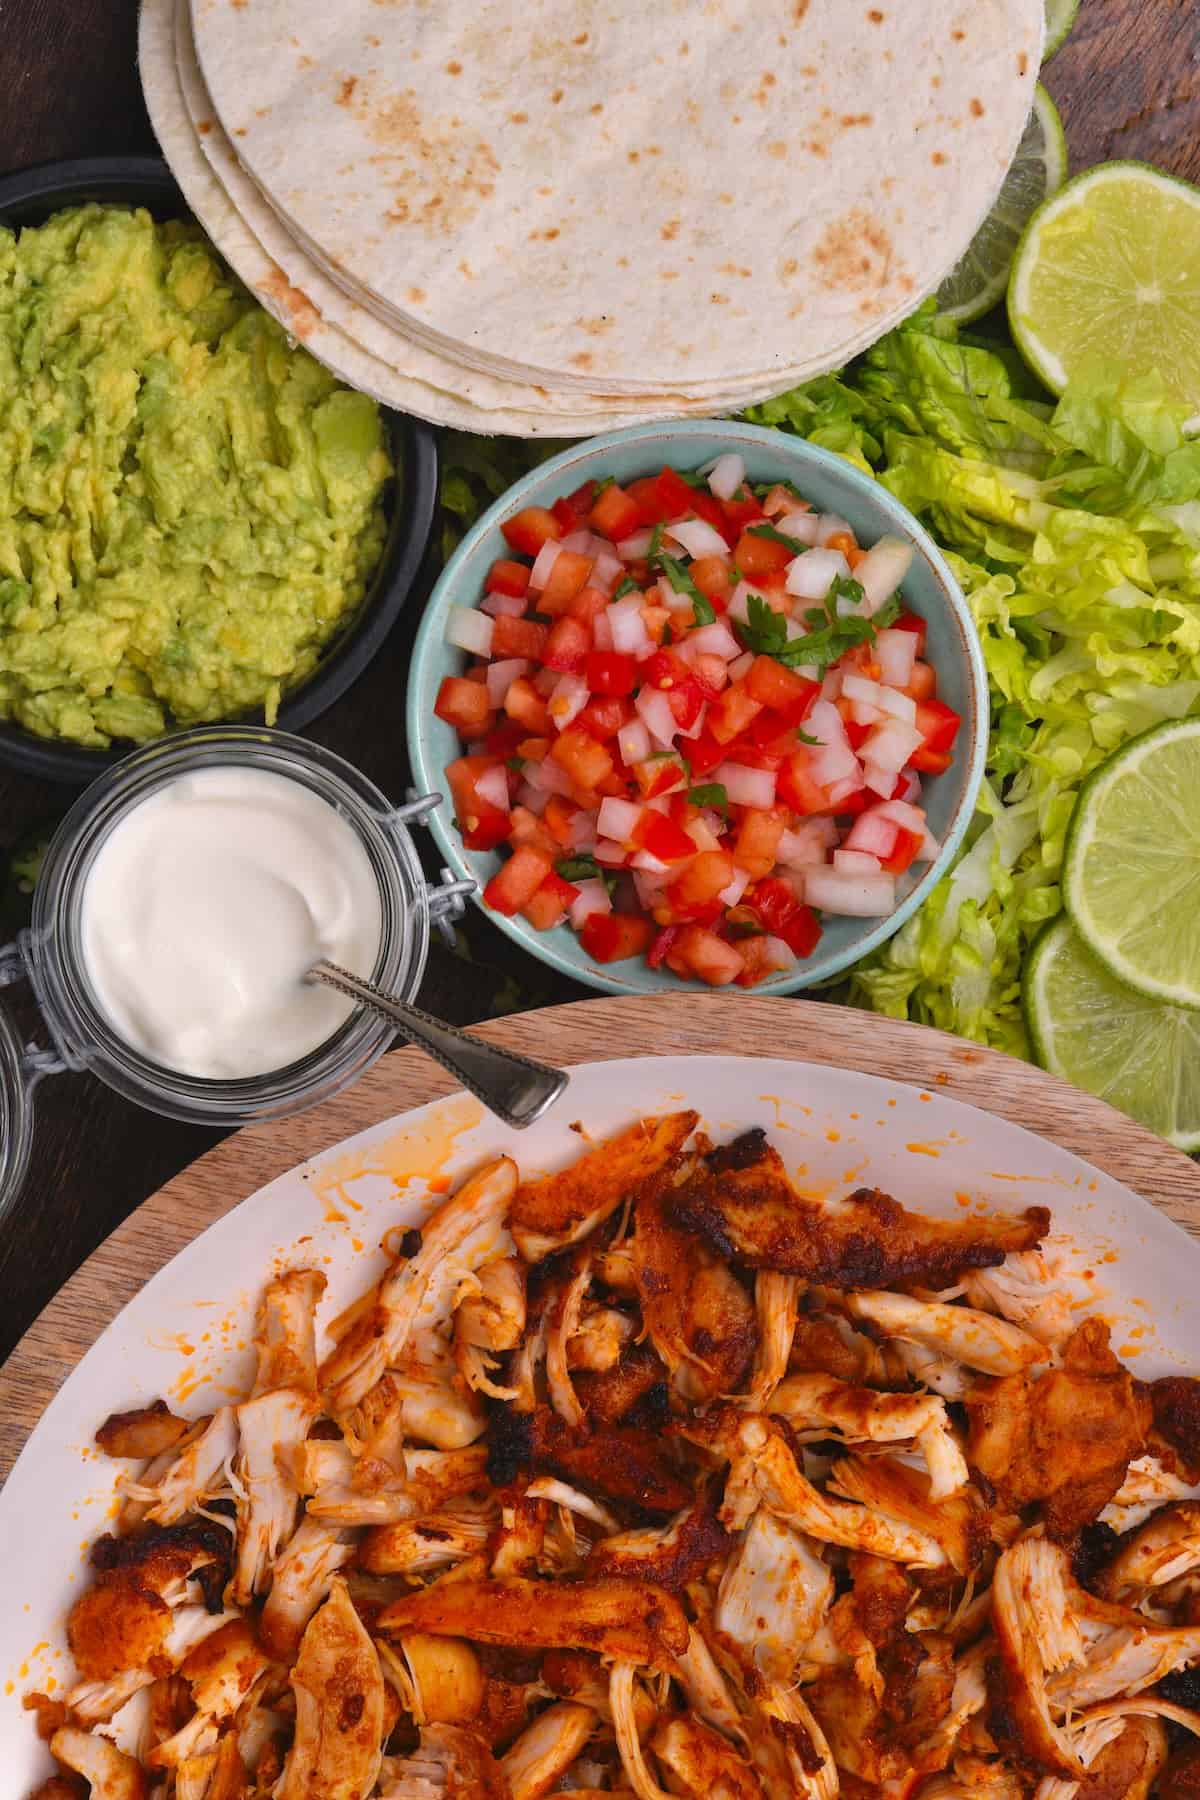 Shredded chicken thighs served with tacos